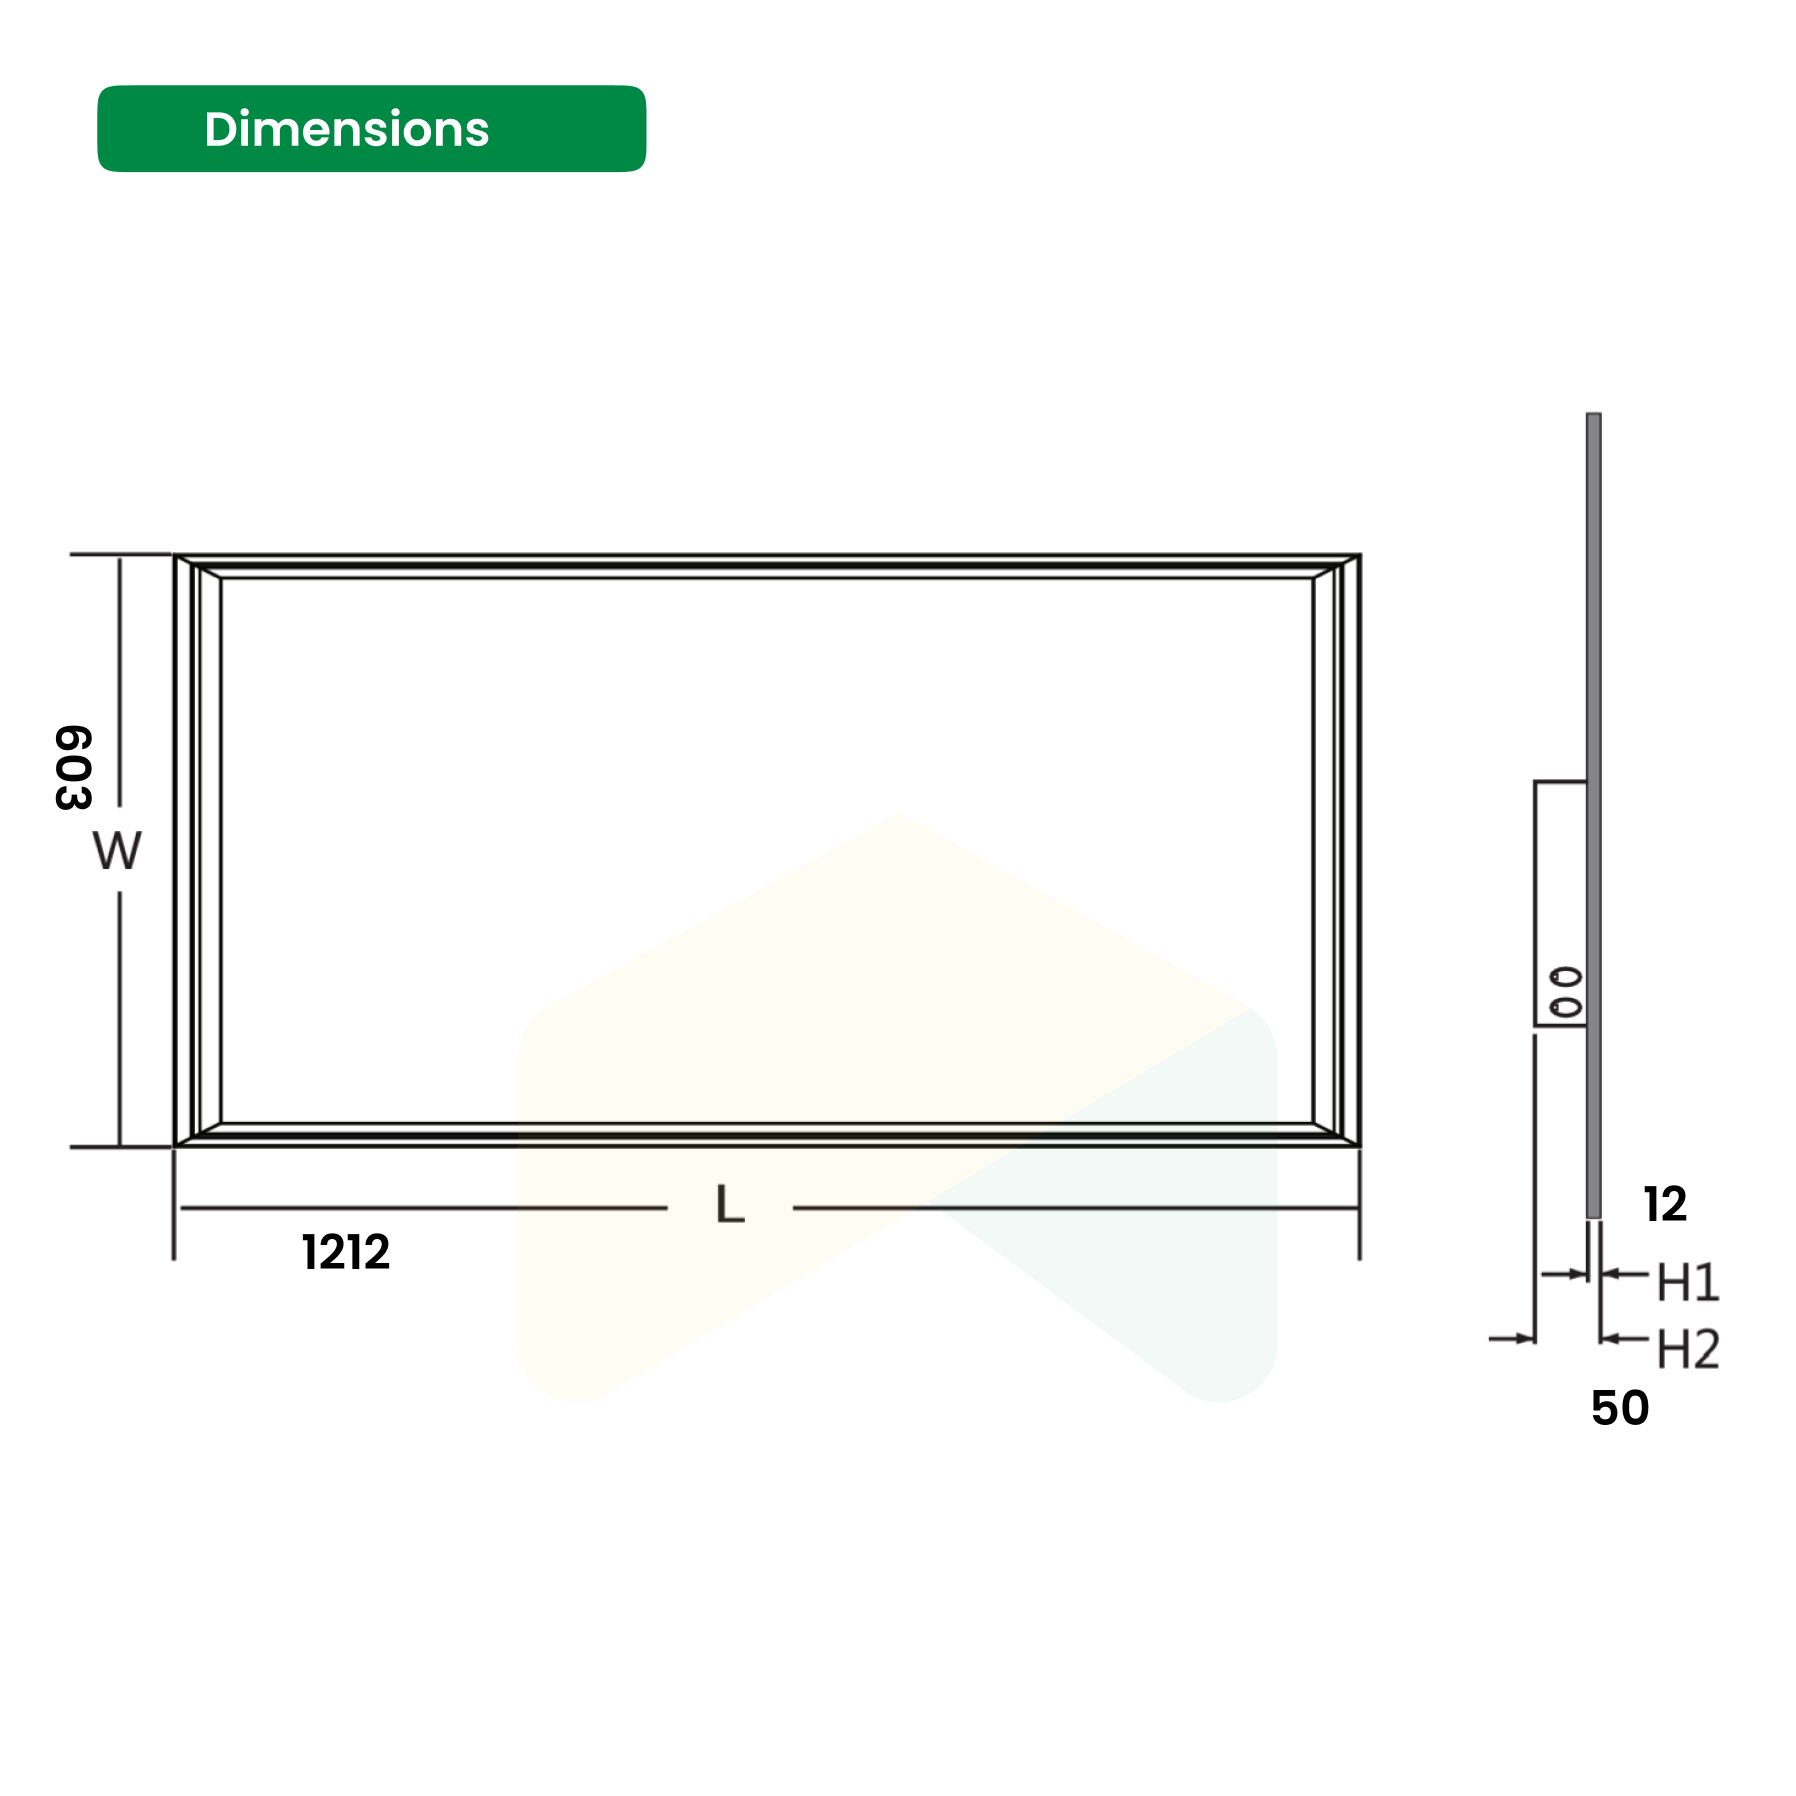 2x4 ft LED Flat Panel - 48W - 6240 Lumens, 4000K, AC 120-277V - 0-10V Dimmable - IP66 - UL, DLC Premium Listed - 5 Years Warranty (2-Pack)